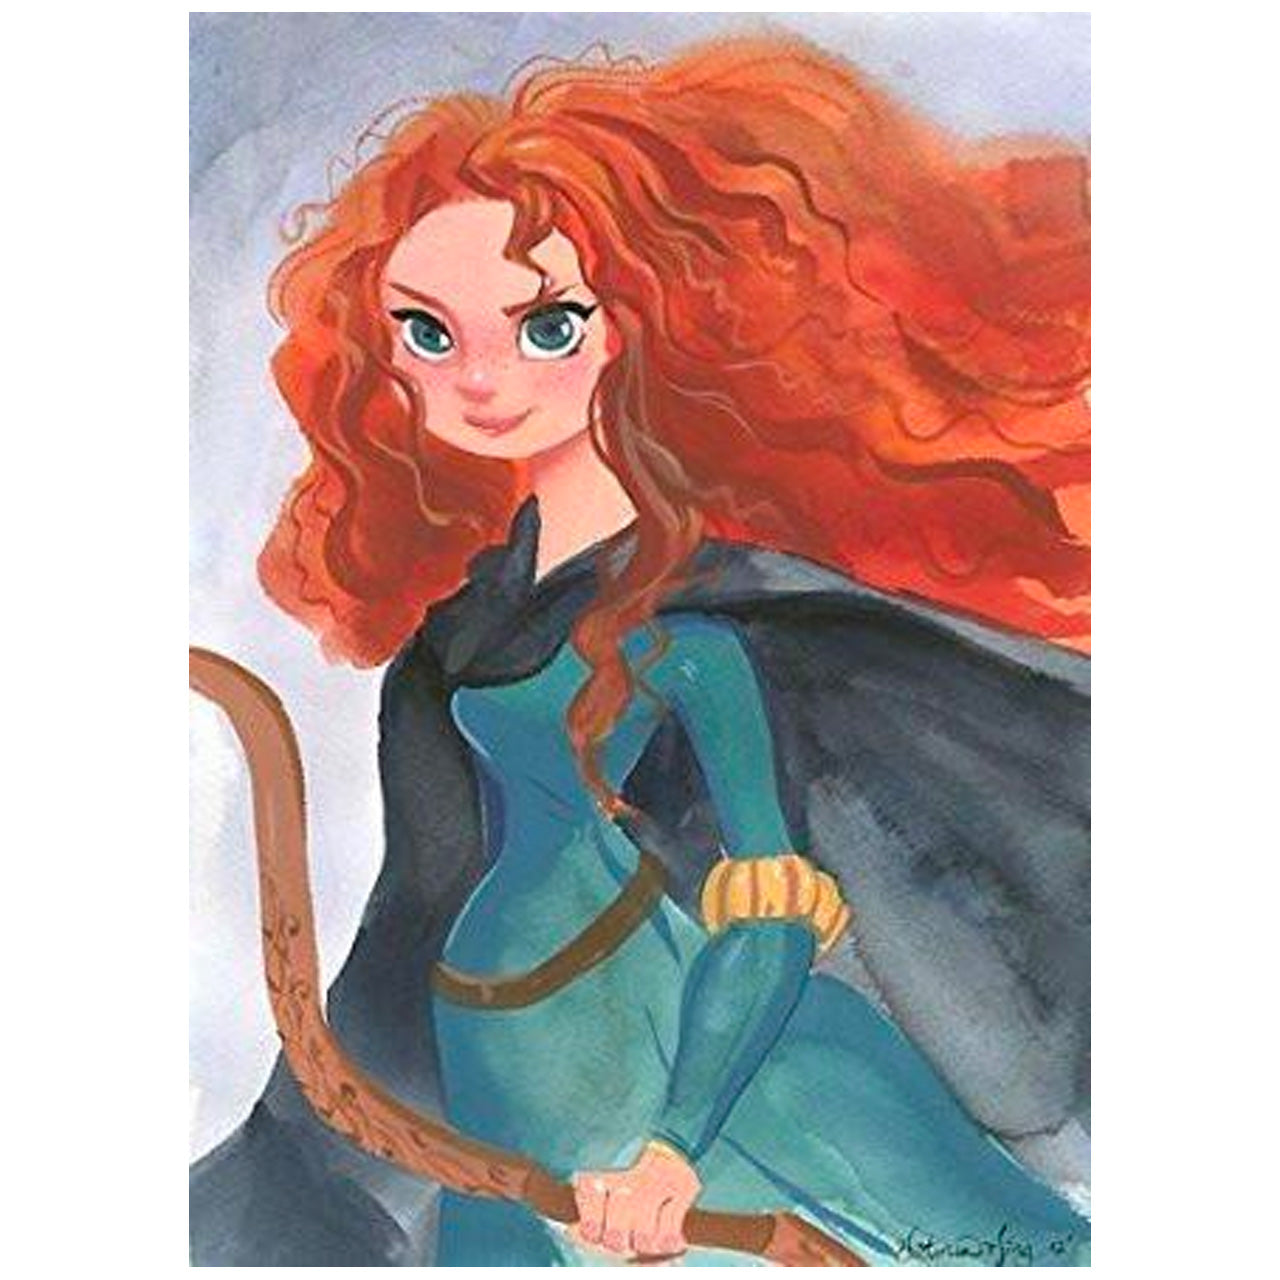 Victoria Ying Disney "Merida" Limited Edition Giclee